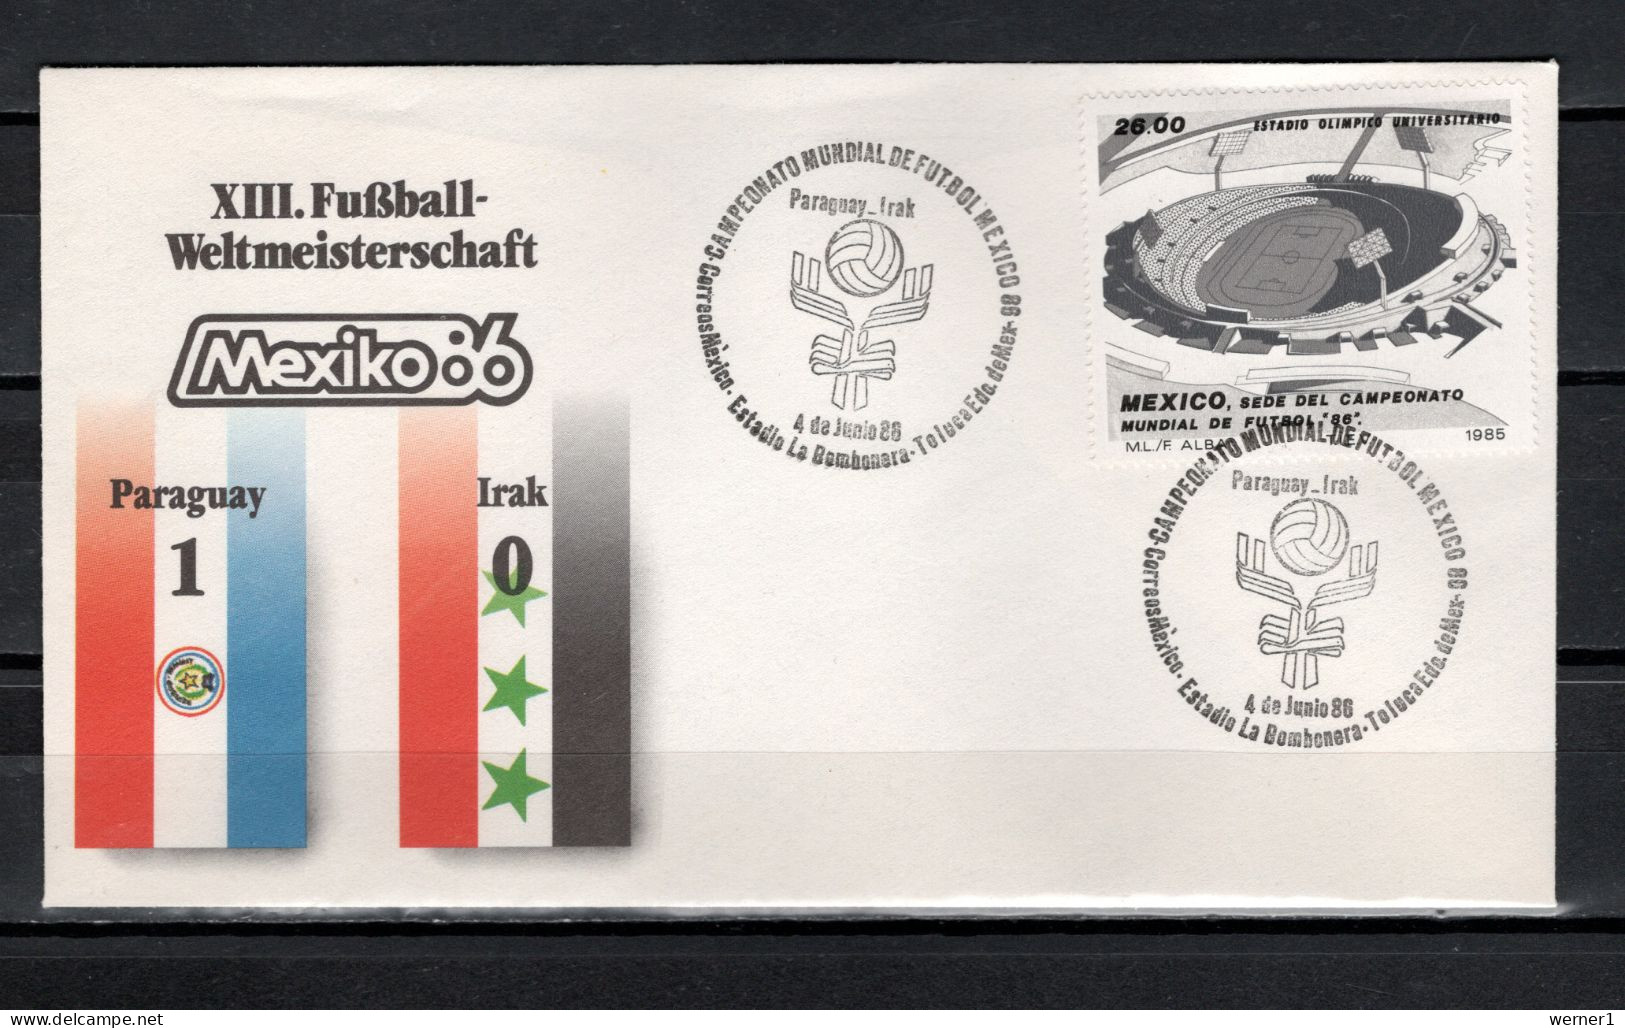 Mexico 1986 Football Soccer World Cup Commemorative Cover Match Paraguay - Iraq 1 : 0 - 1986 – Mexique